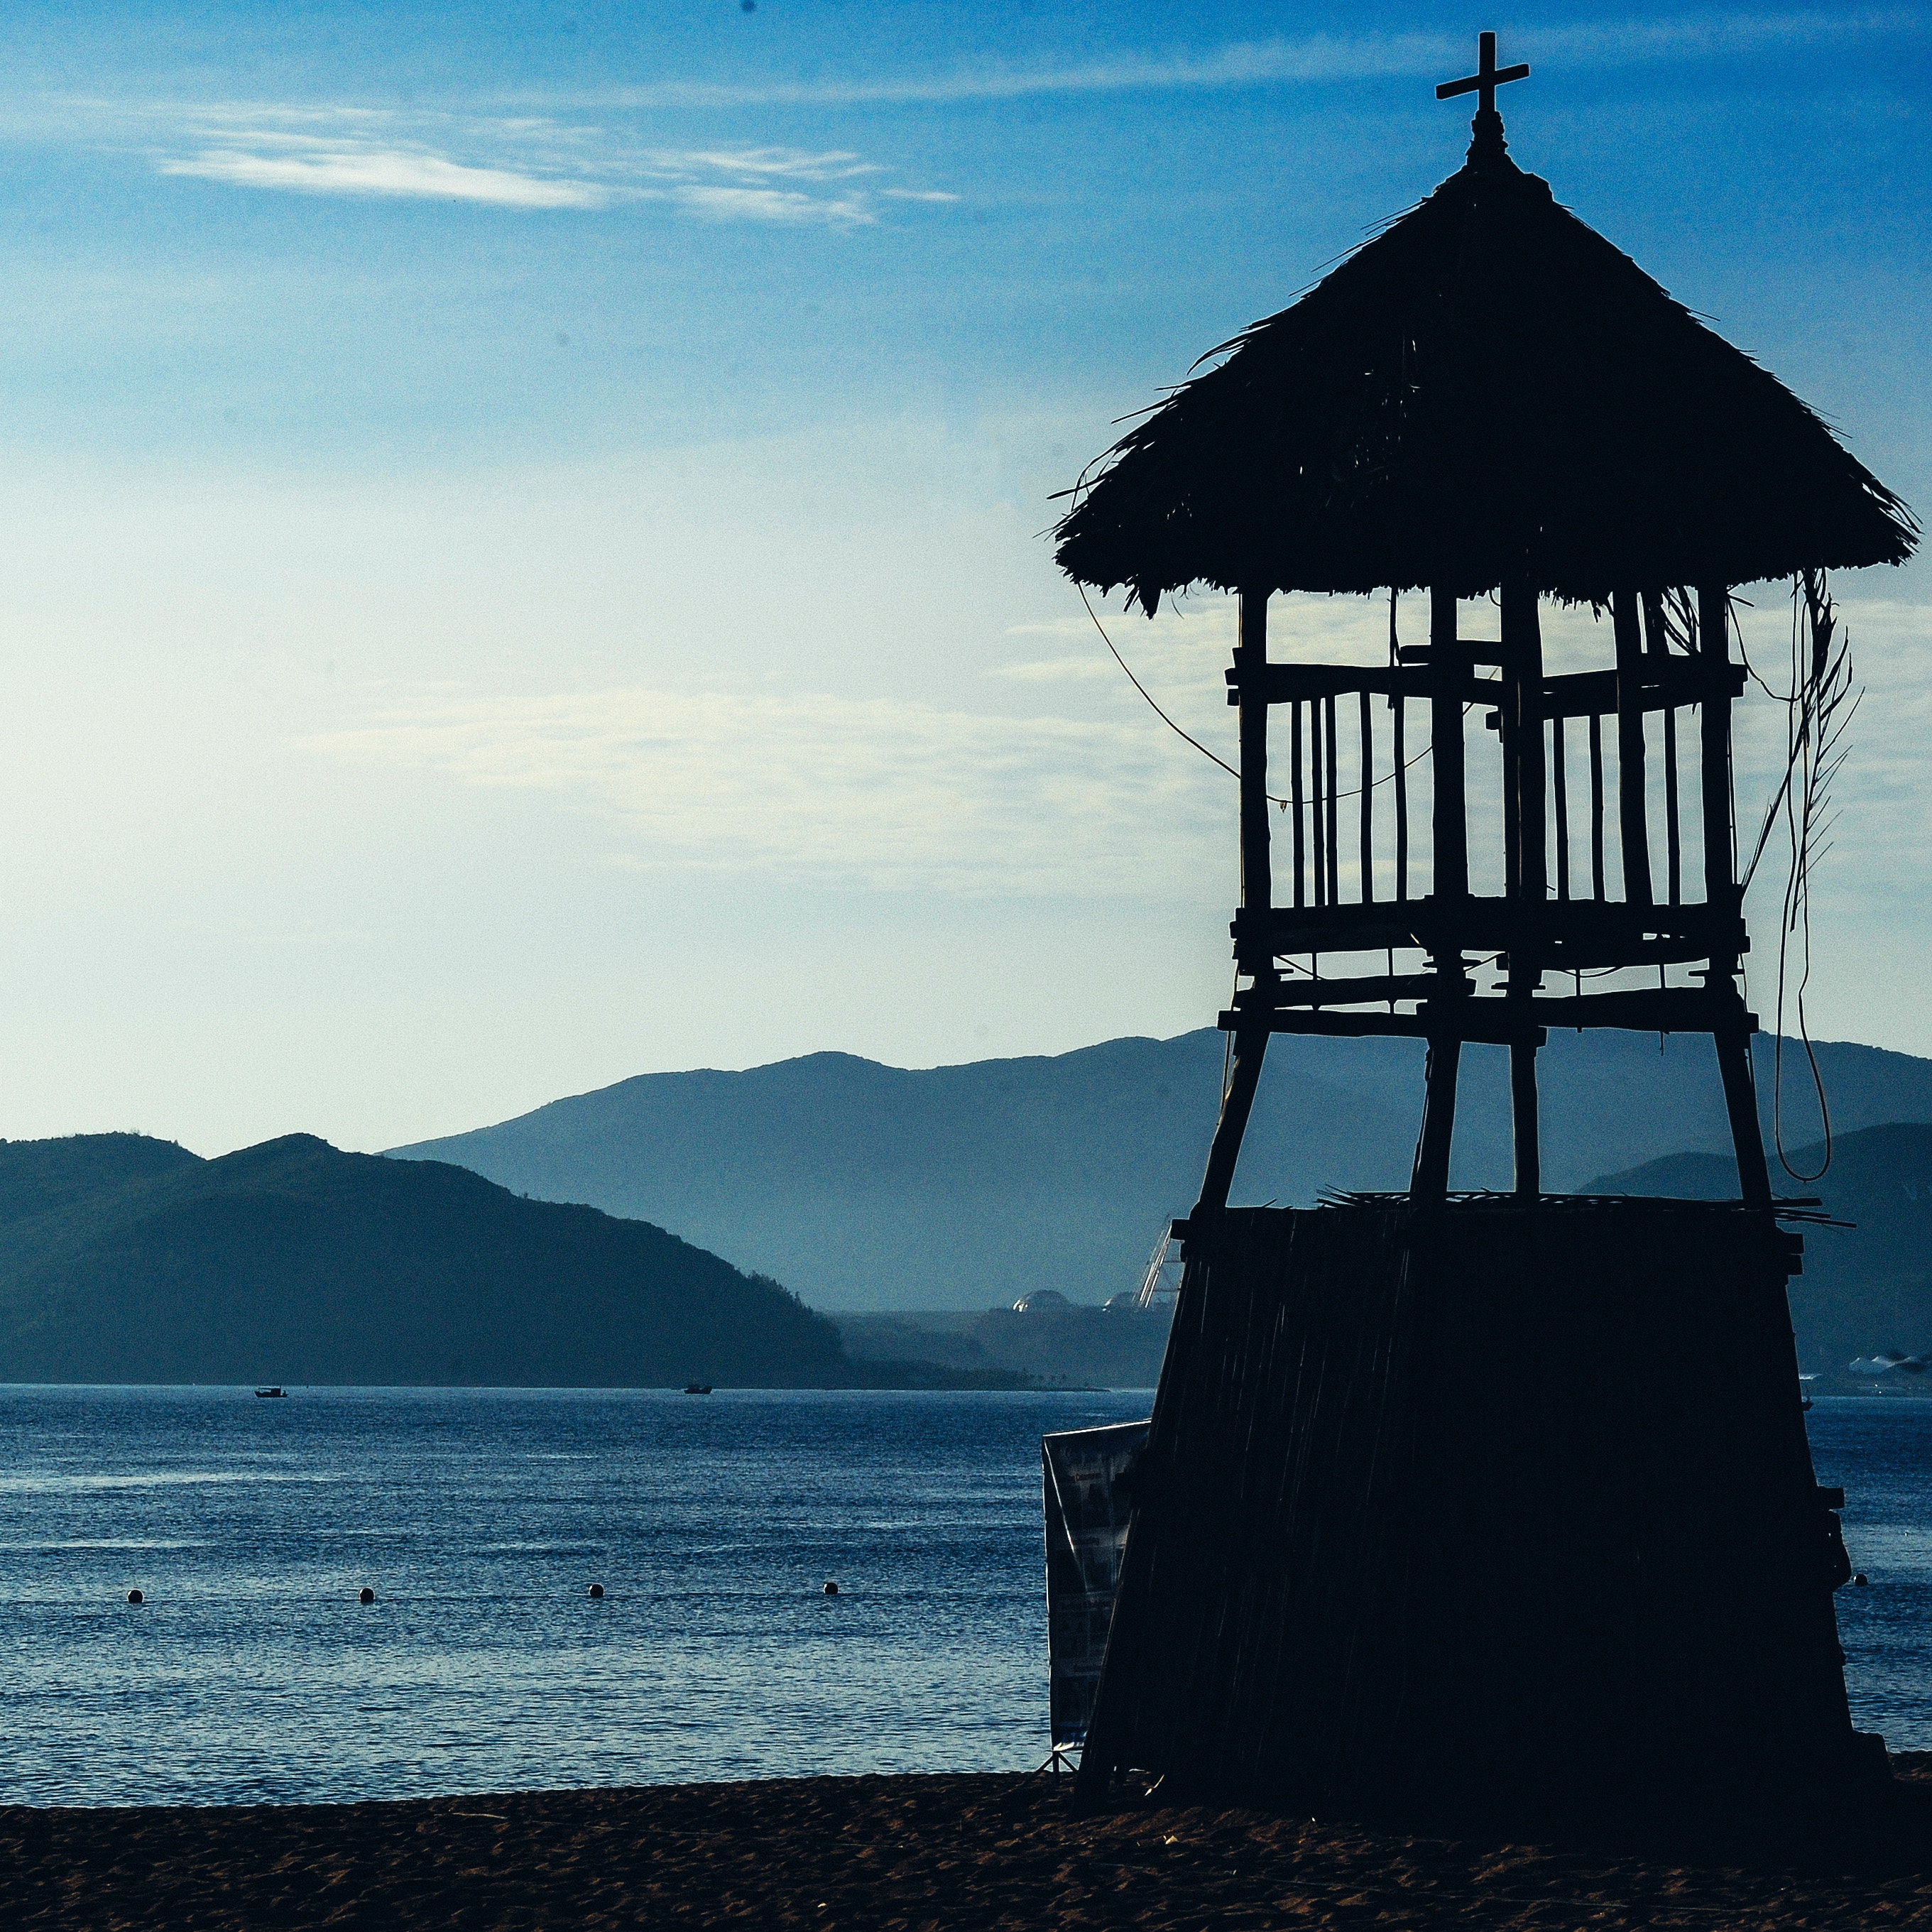 Silhouette Photo of Wooden Guard House, Bay, Beach, Clouds, Landscape, HQ Photo